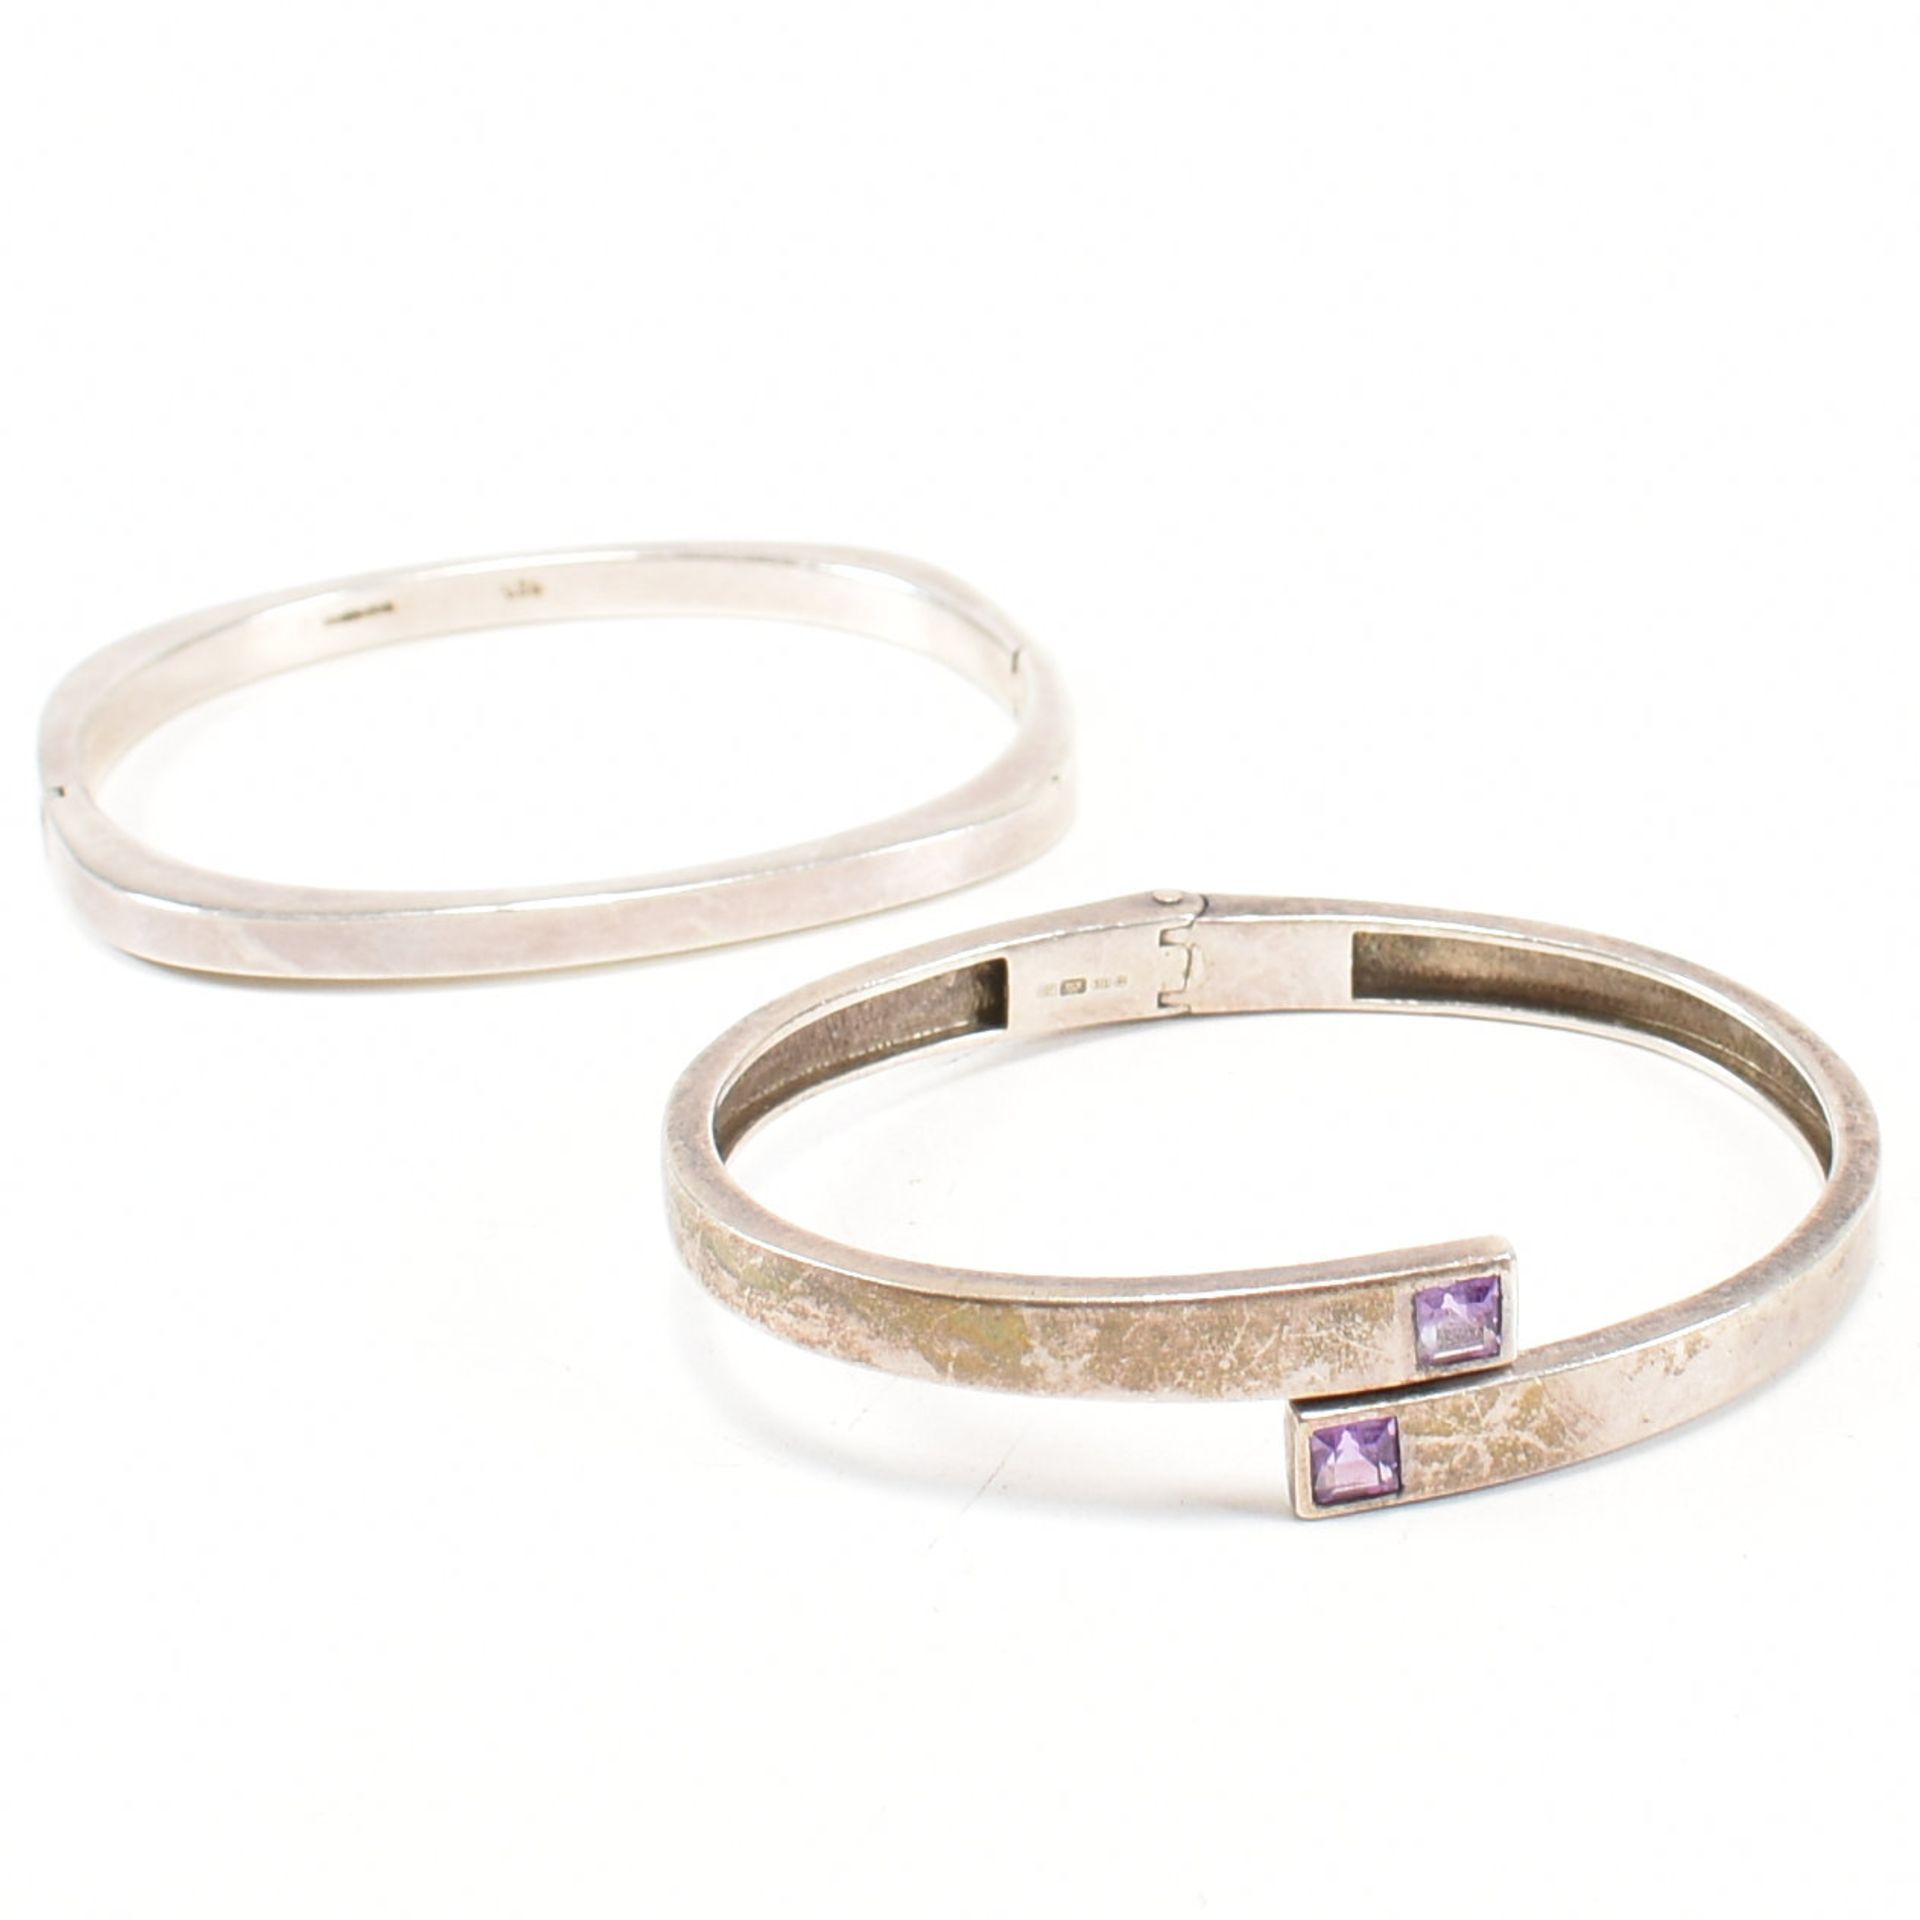 TWO HALLMARKED 925 SILVER BANGLES